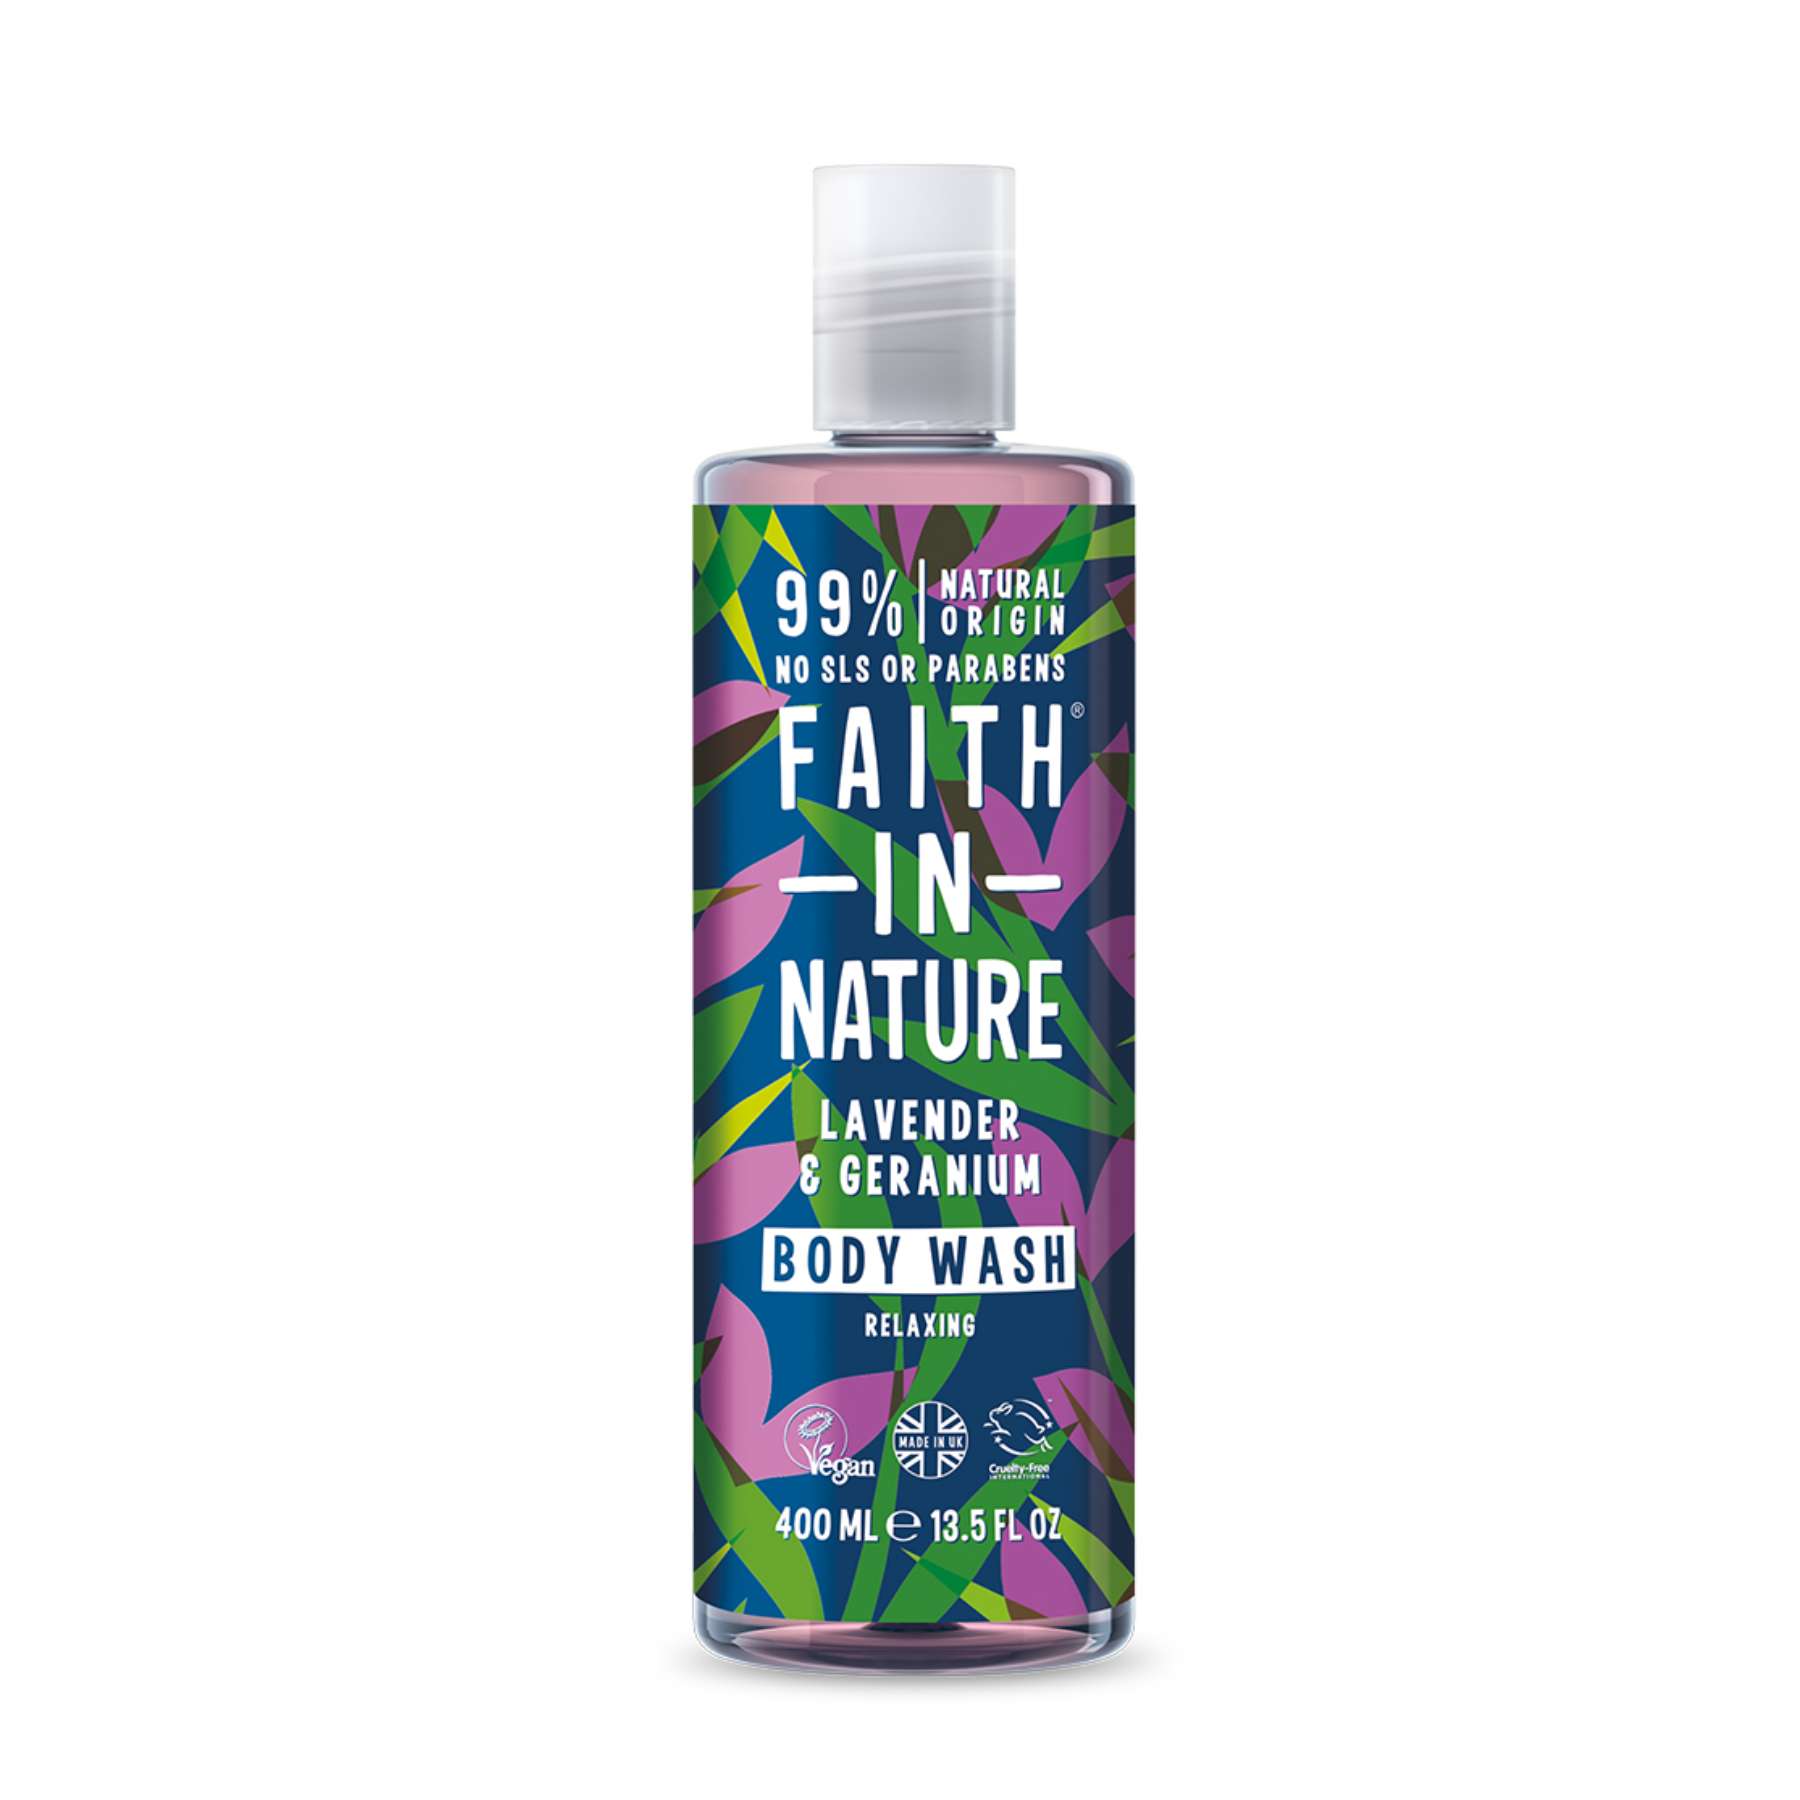 Shop Faith in Nature Body Wash - Lavender & Geranium 400 ml on Sublime Life. Calm your senses with a relaxing shower gel